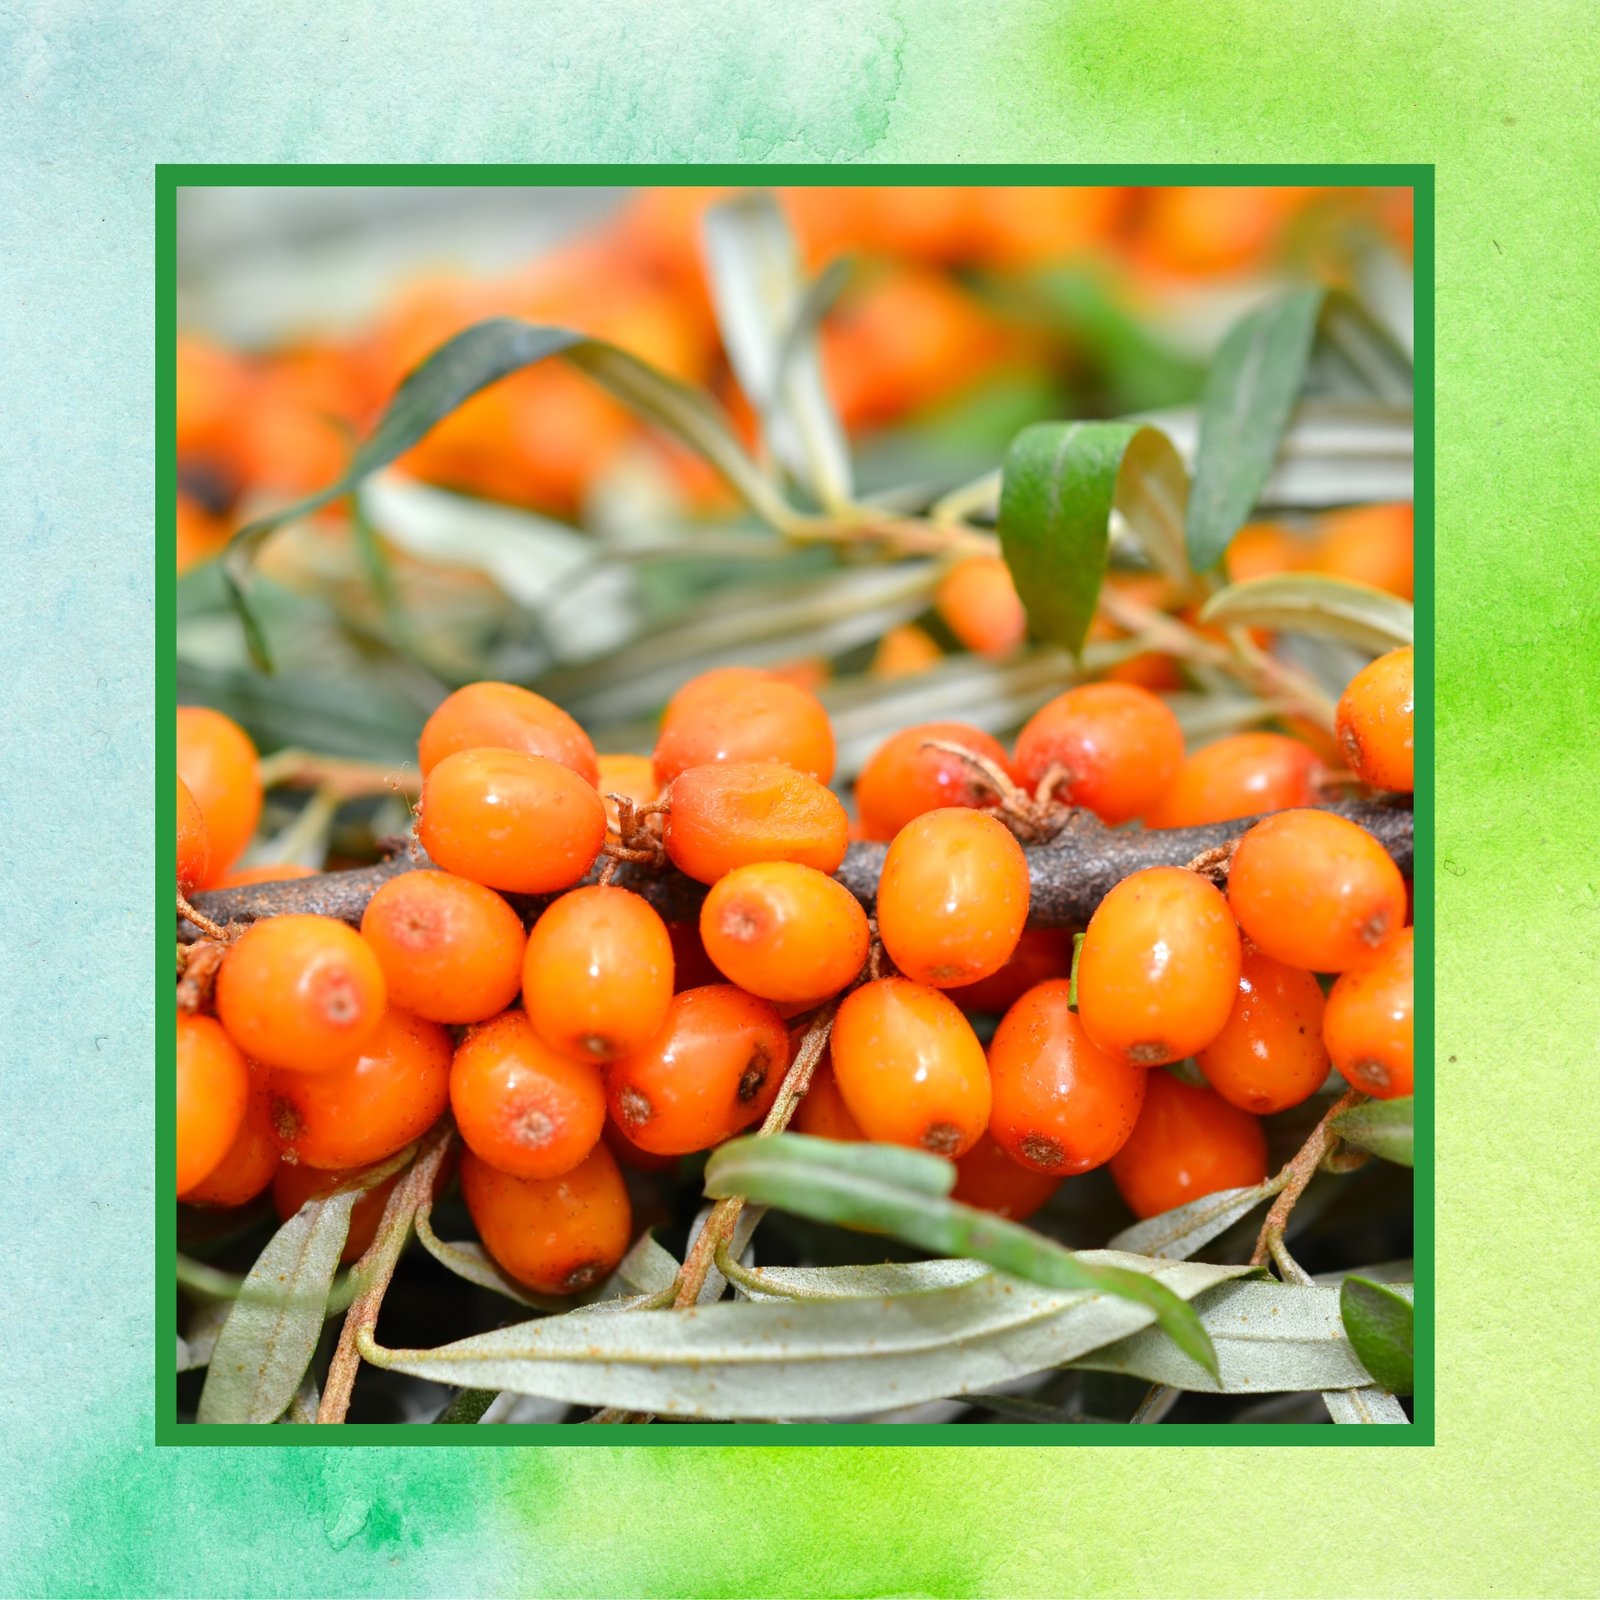 Sea Buckthorn DS Img (right) - 2